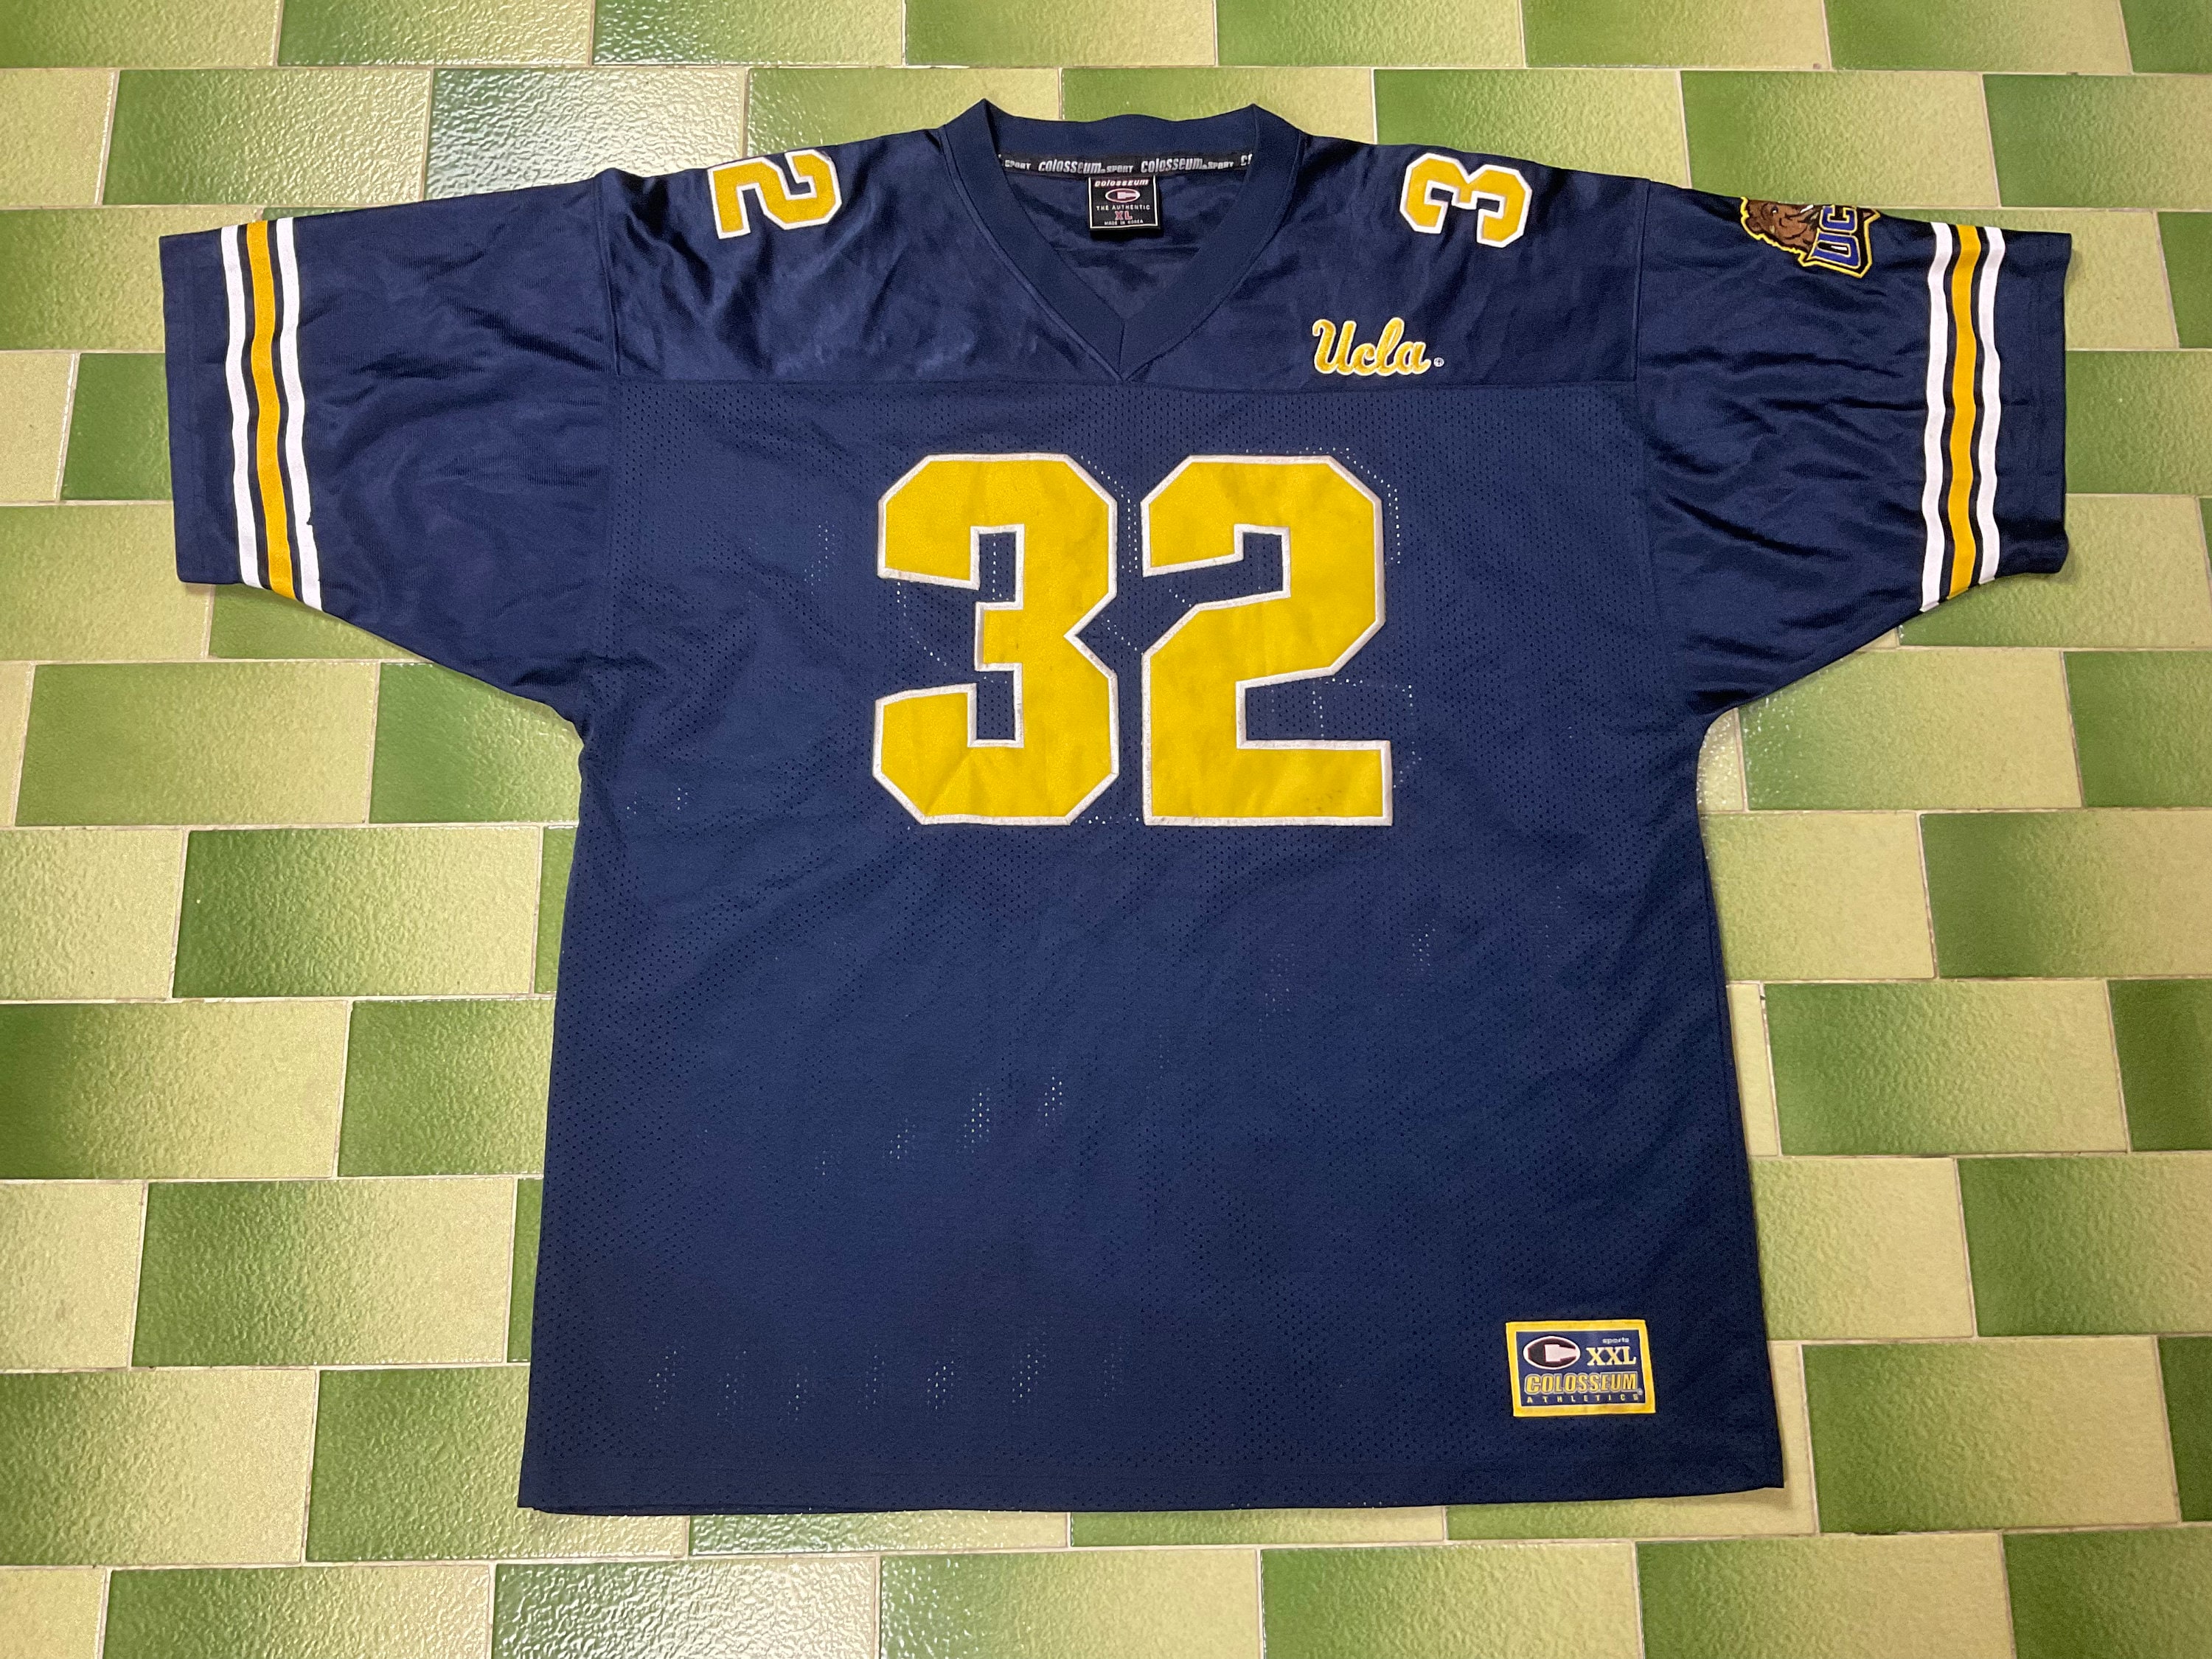 Colosseum Women's UCLA Bruins White Cropped Jersey, XL